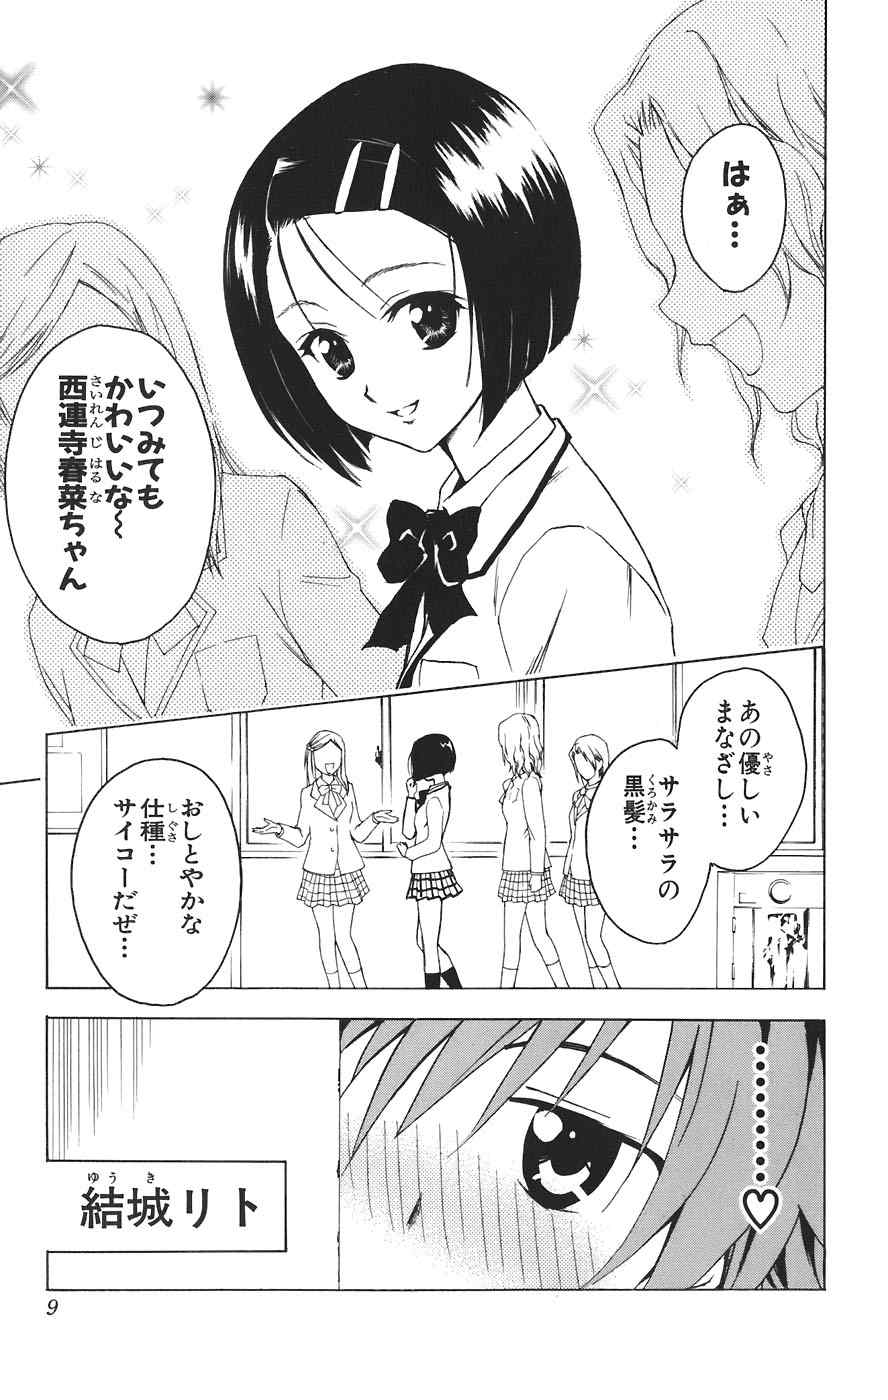 《To LOVEるとらぶる》漫画 To LOVE 01卷